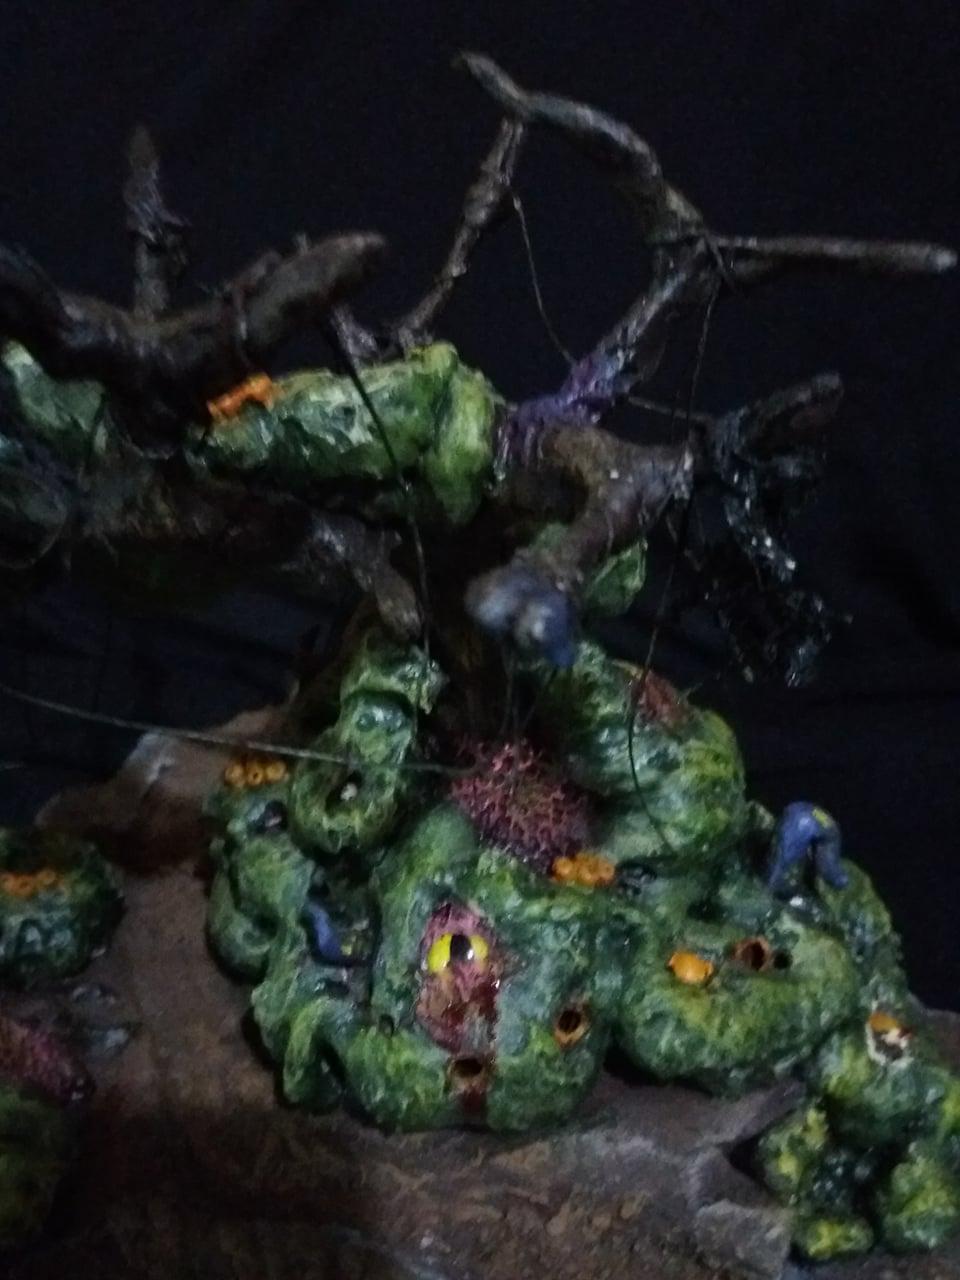 Age, Chaos, Eyes, Forest, Garden, Horns, Horrors, Infested, Nurgle, Passage, Sigmar, Teeth, Tentacles, Terrain, Ulcers, Warhammer Fantasy, Woods